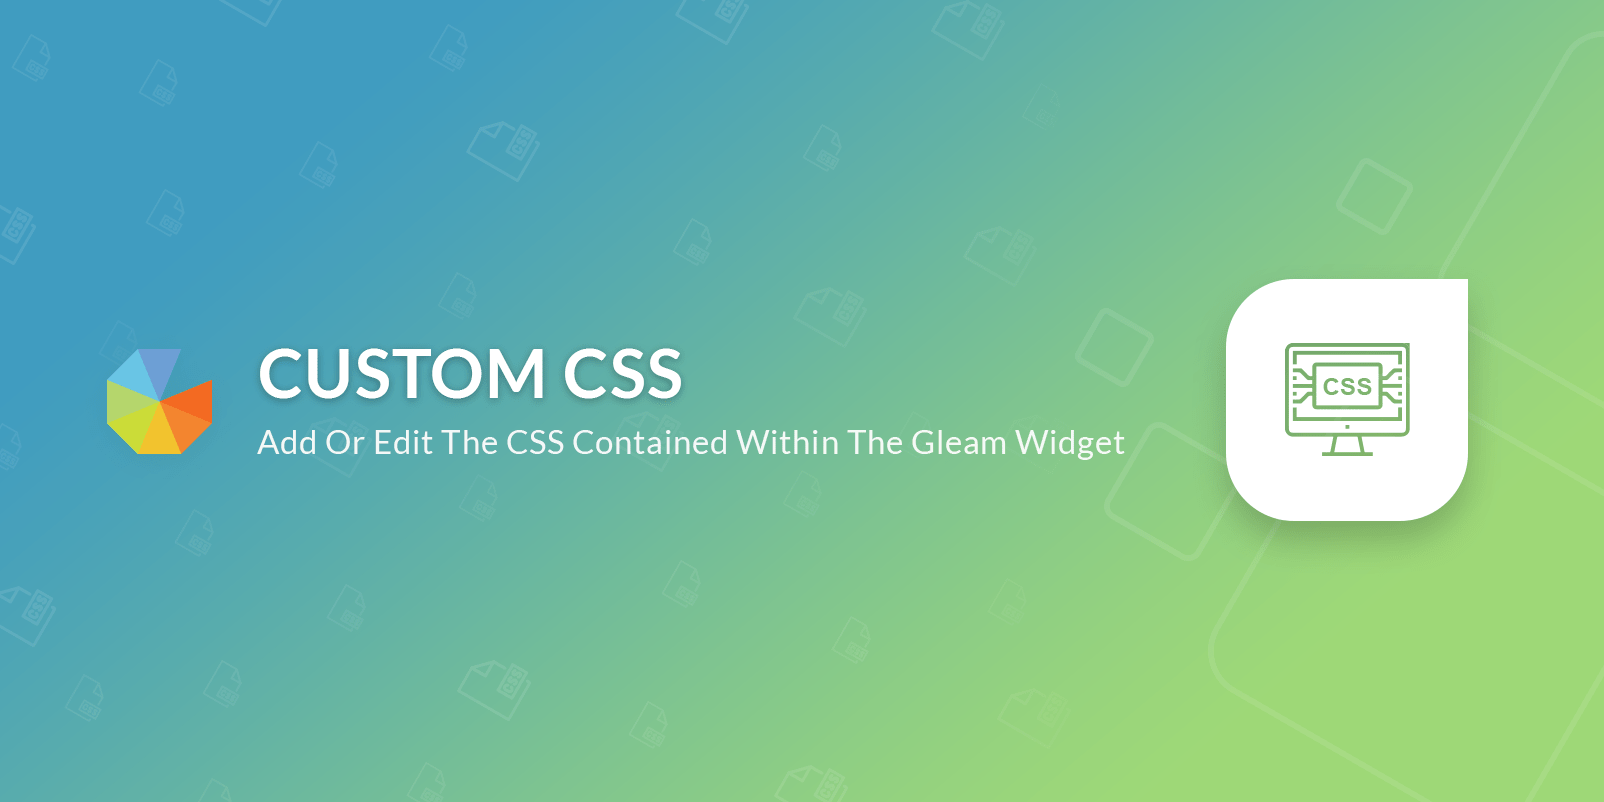 Custom CSS, add or edit the CSS contained within the Gleam widget